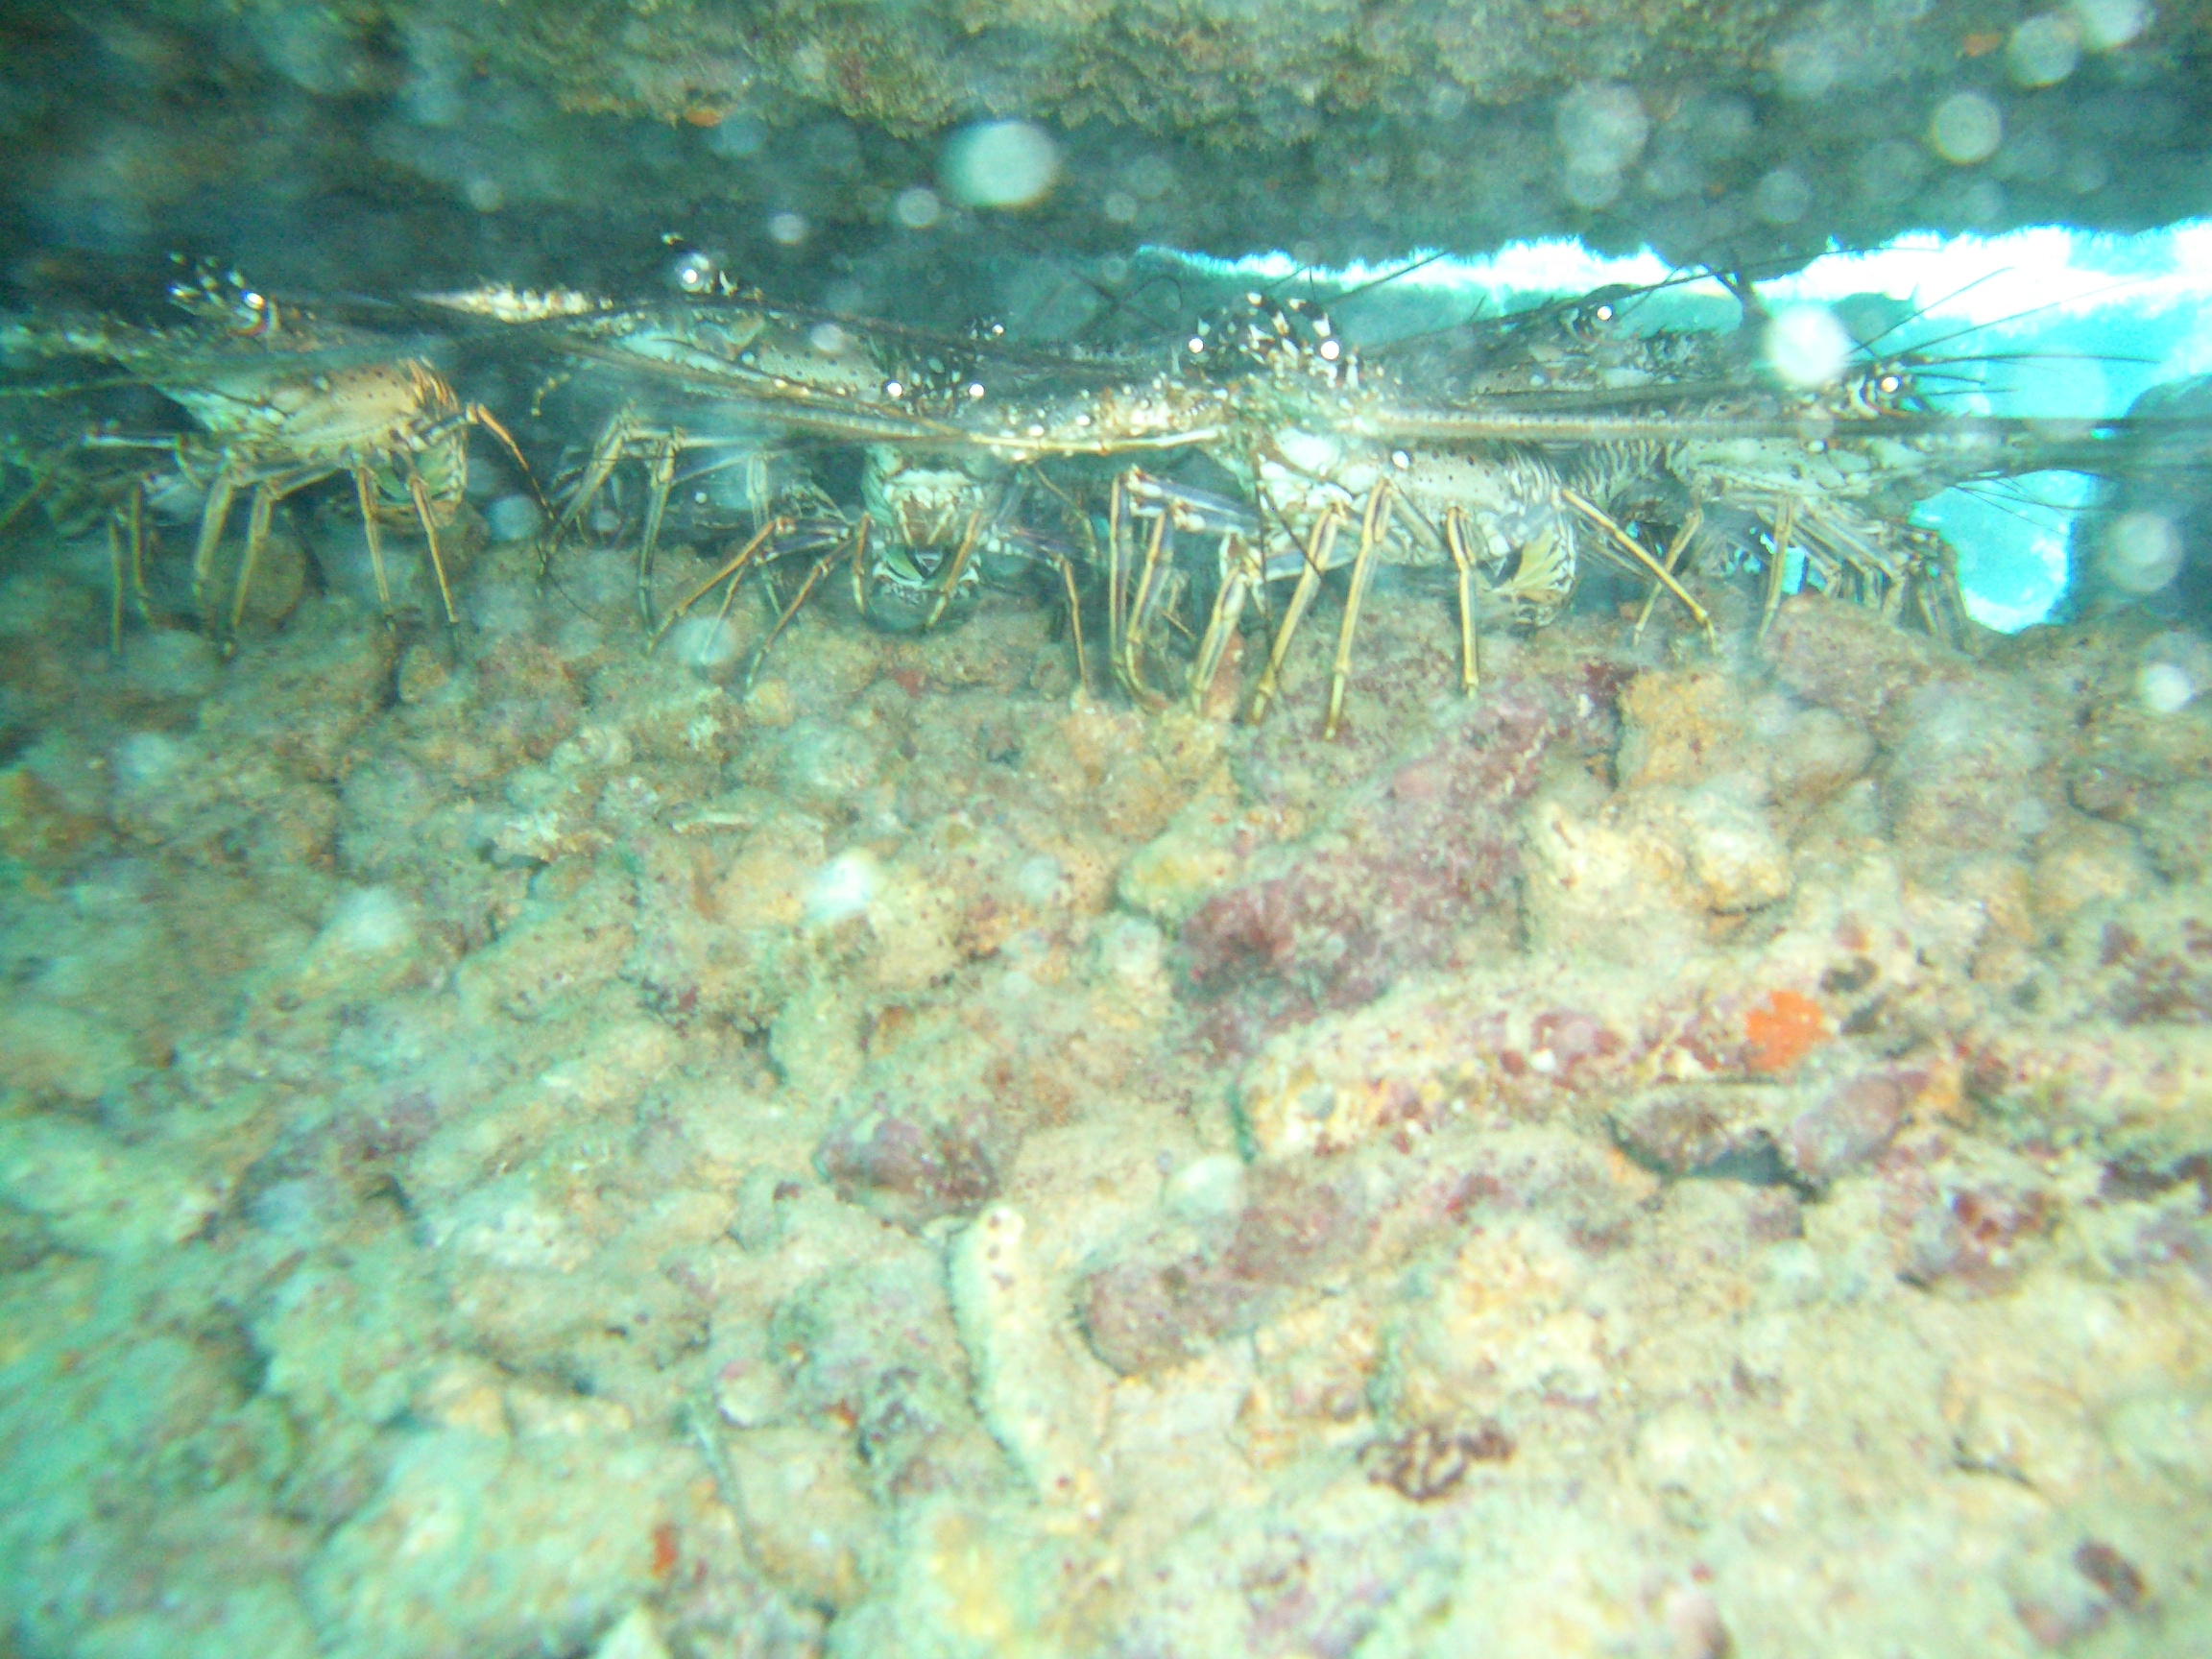 A family of Spiny Lobsters under the Wreck!